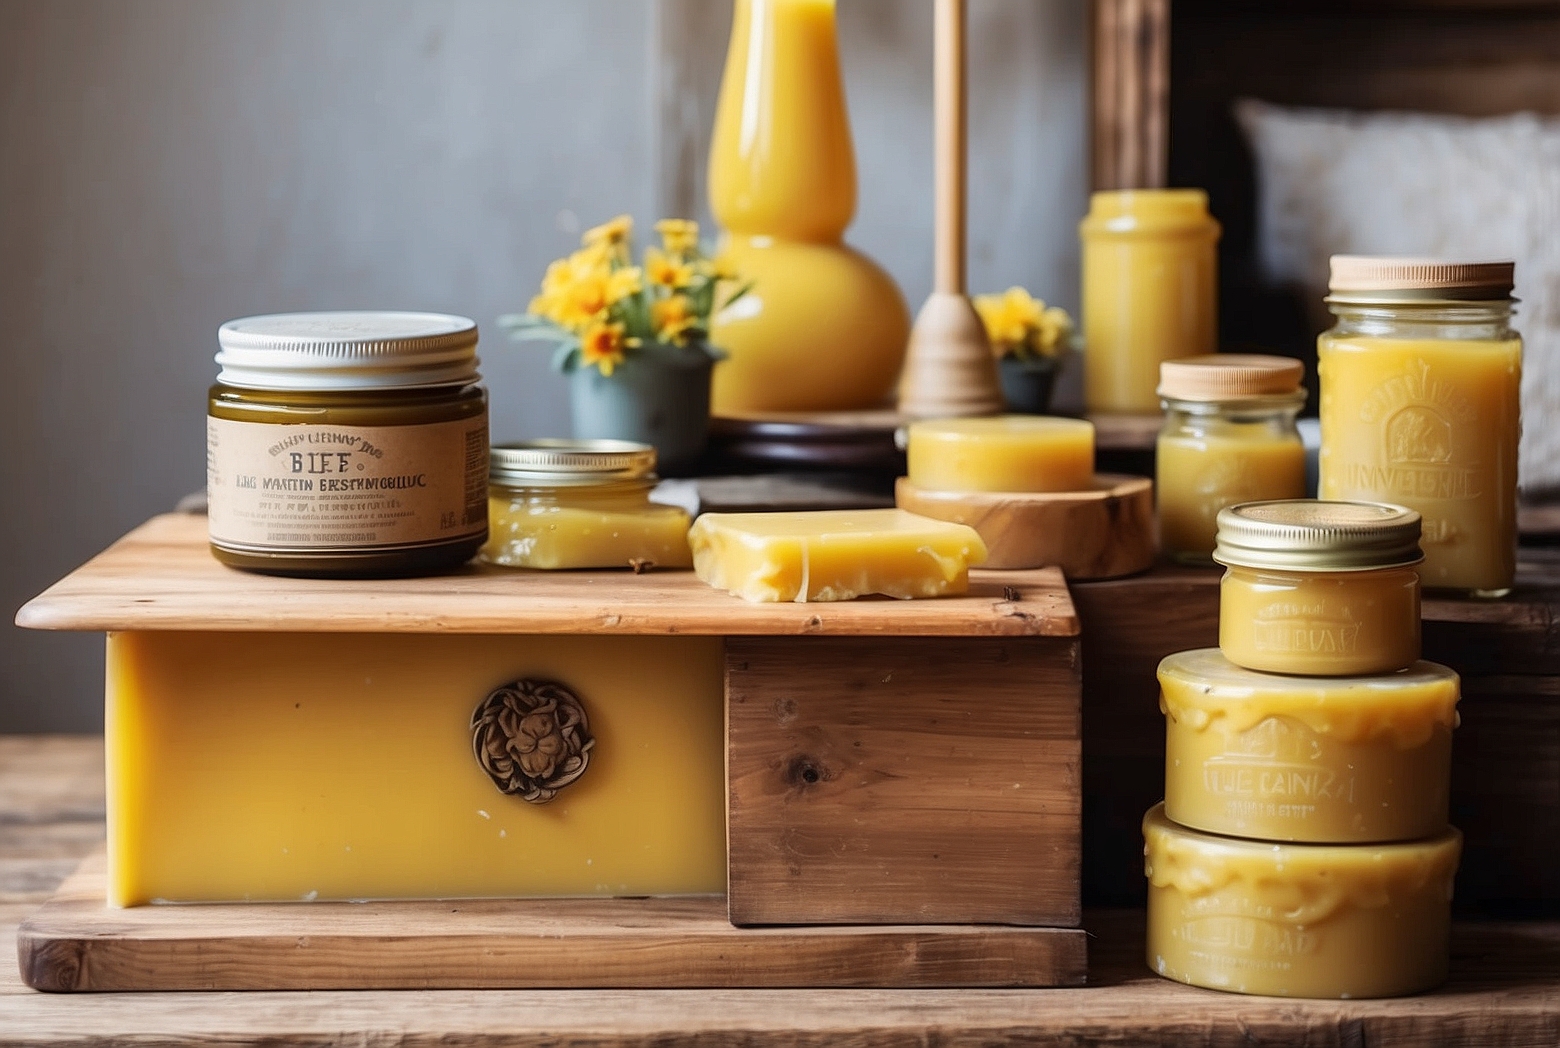 The Ultimate Guide: How to Use Beeswax on Furniture